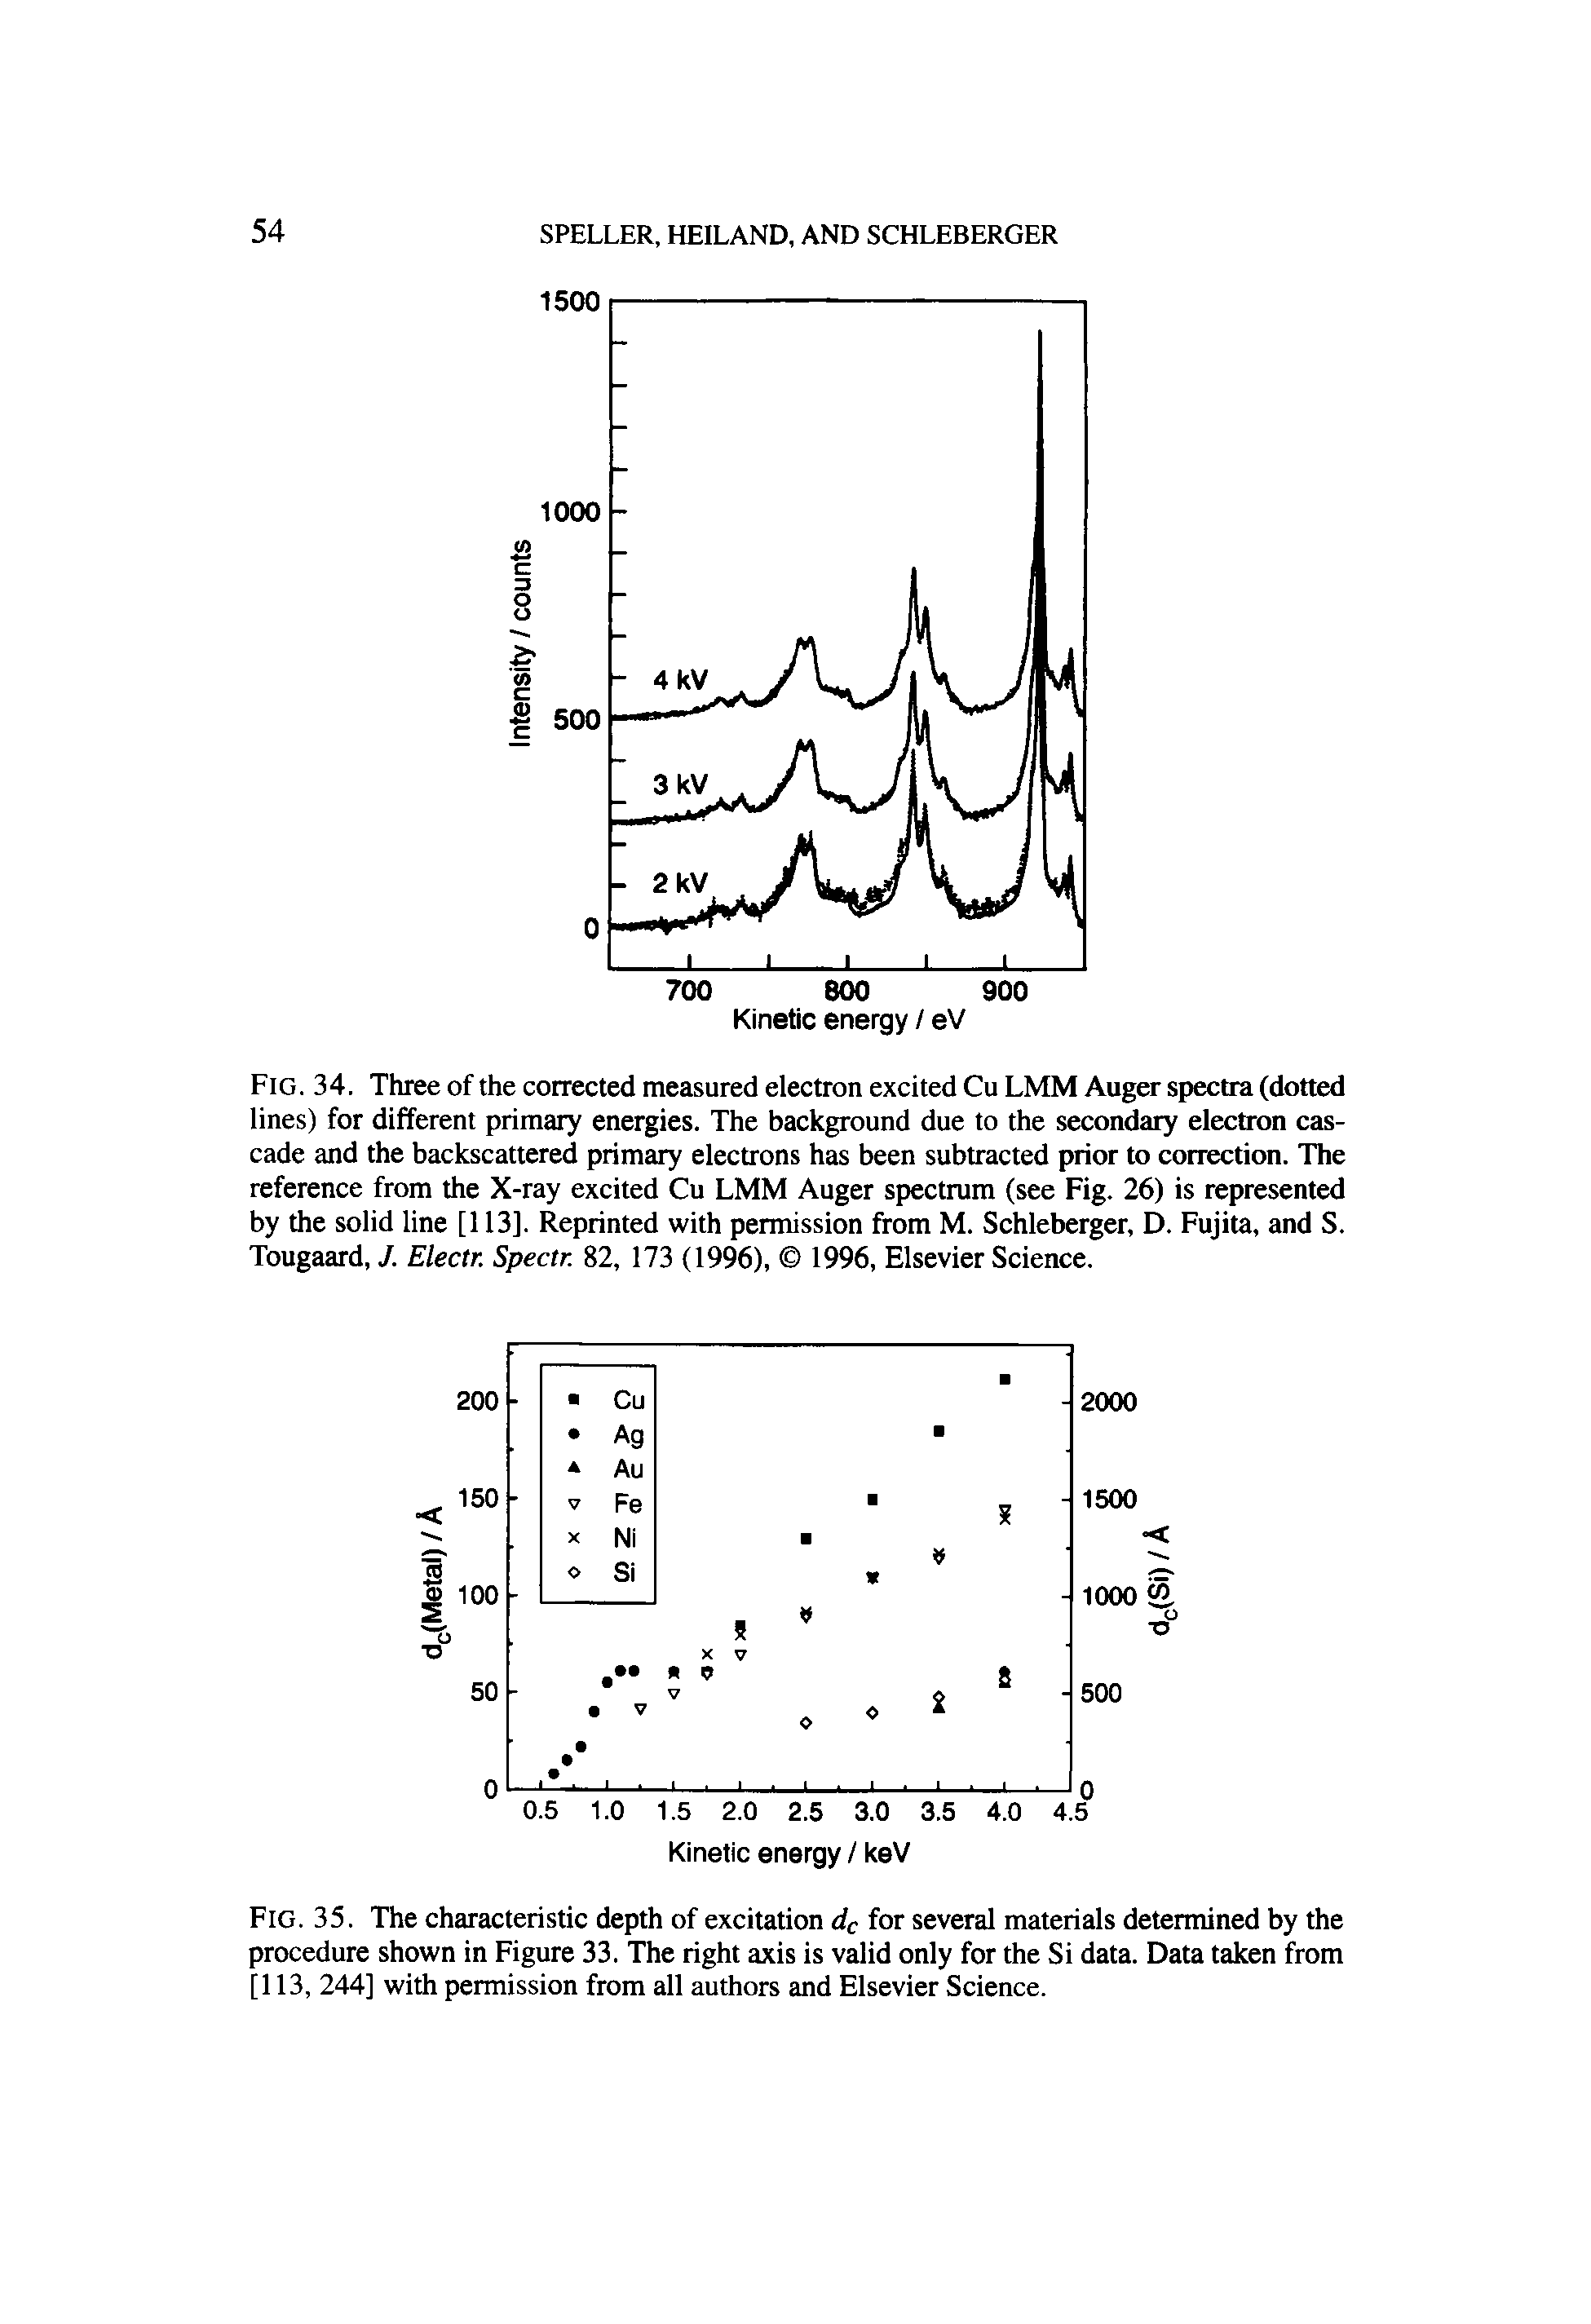 Fig. 34. Three of the corrected measured electron excited Cu LMM Auger spectra (dotted lines) for different primary energies. The background due to the secondary electron cascade and the backscattered primary electrons has been subtracted prior to correction. The reference from the X-ray excited Cu LMM Auger spectrum (see Fig. 26) is represented by the solid line [113]. Reprinted with permission from M. Schleberger, D. Fujita, and S. Tougaard, J. Electr. Spectr. 82, 173 (1996), 1996, Elsevier Science.